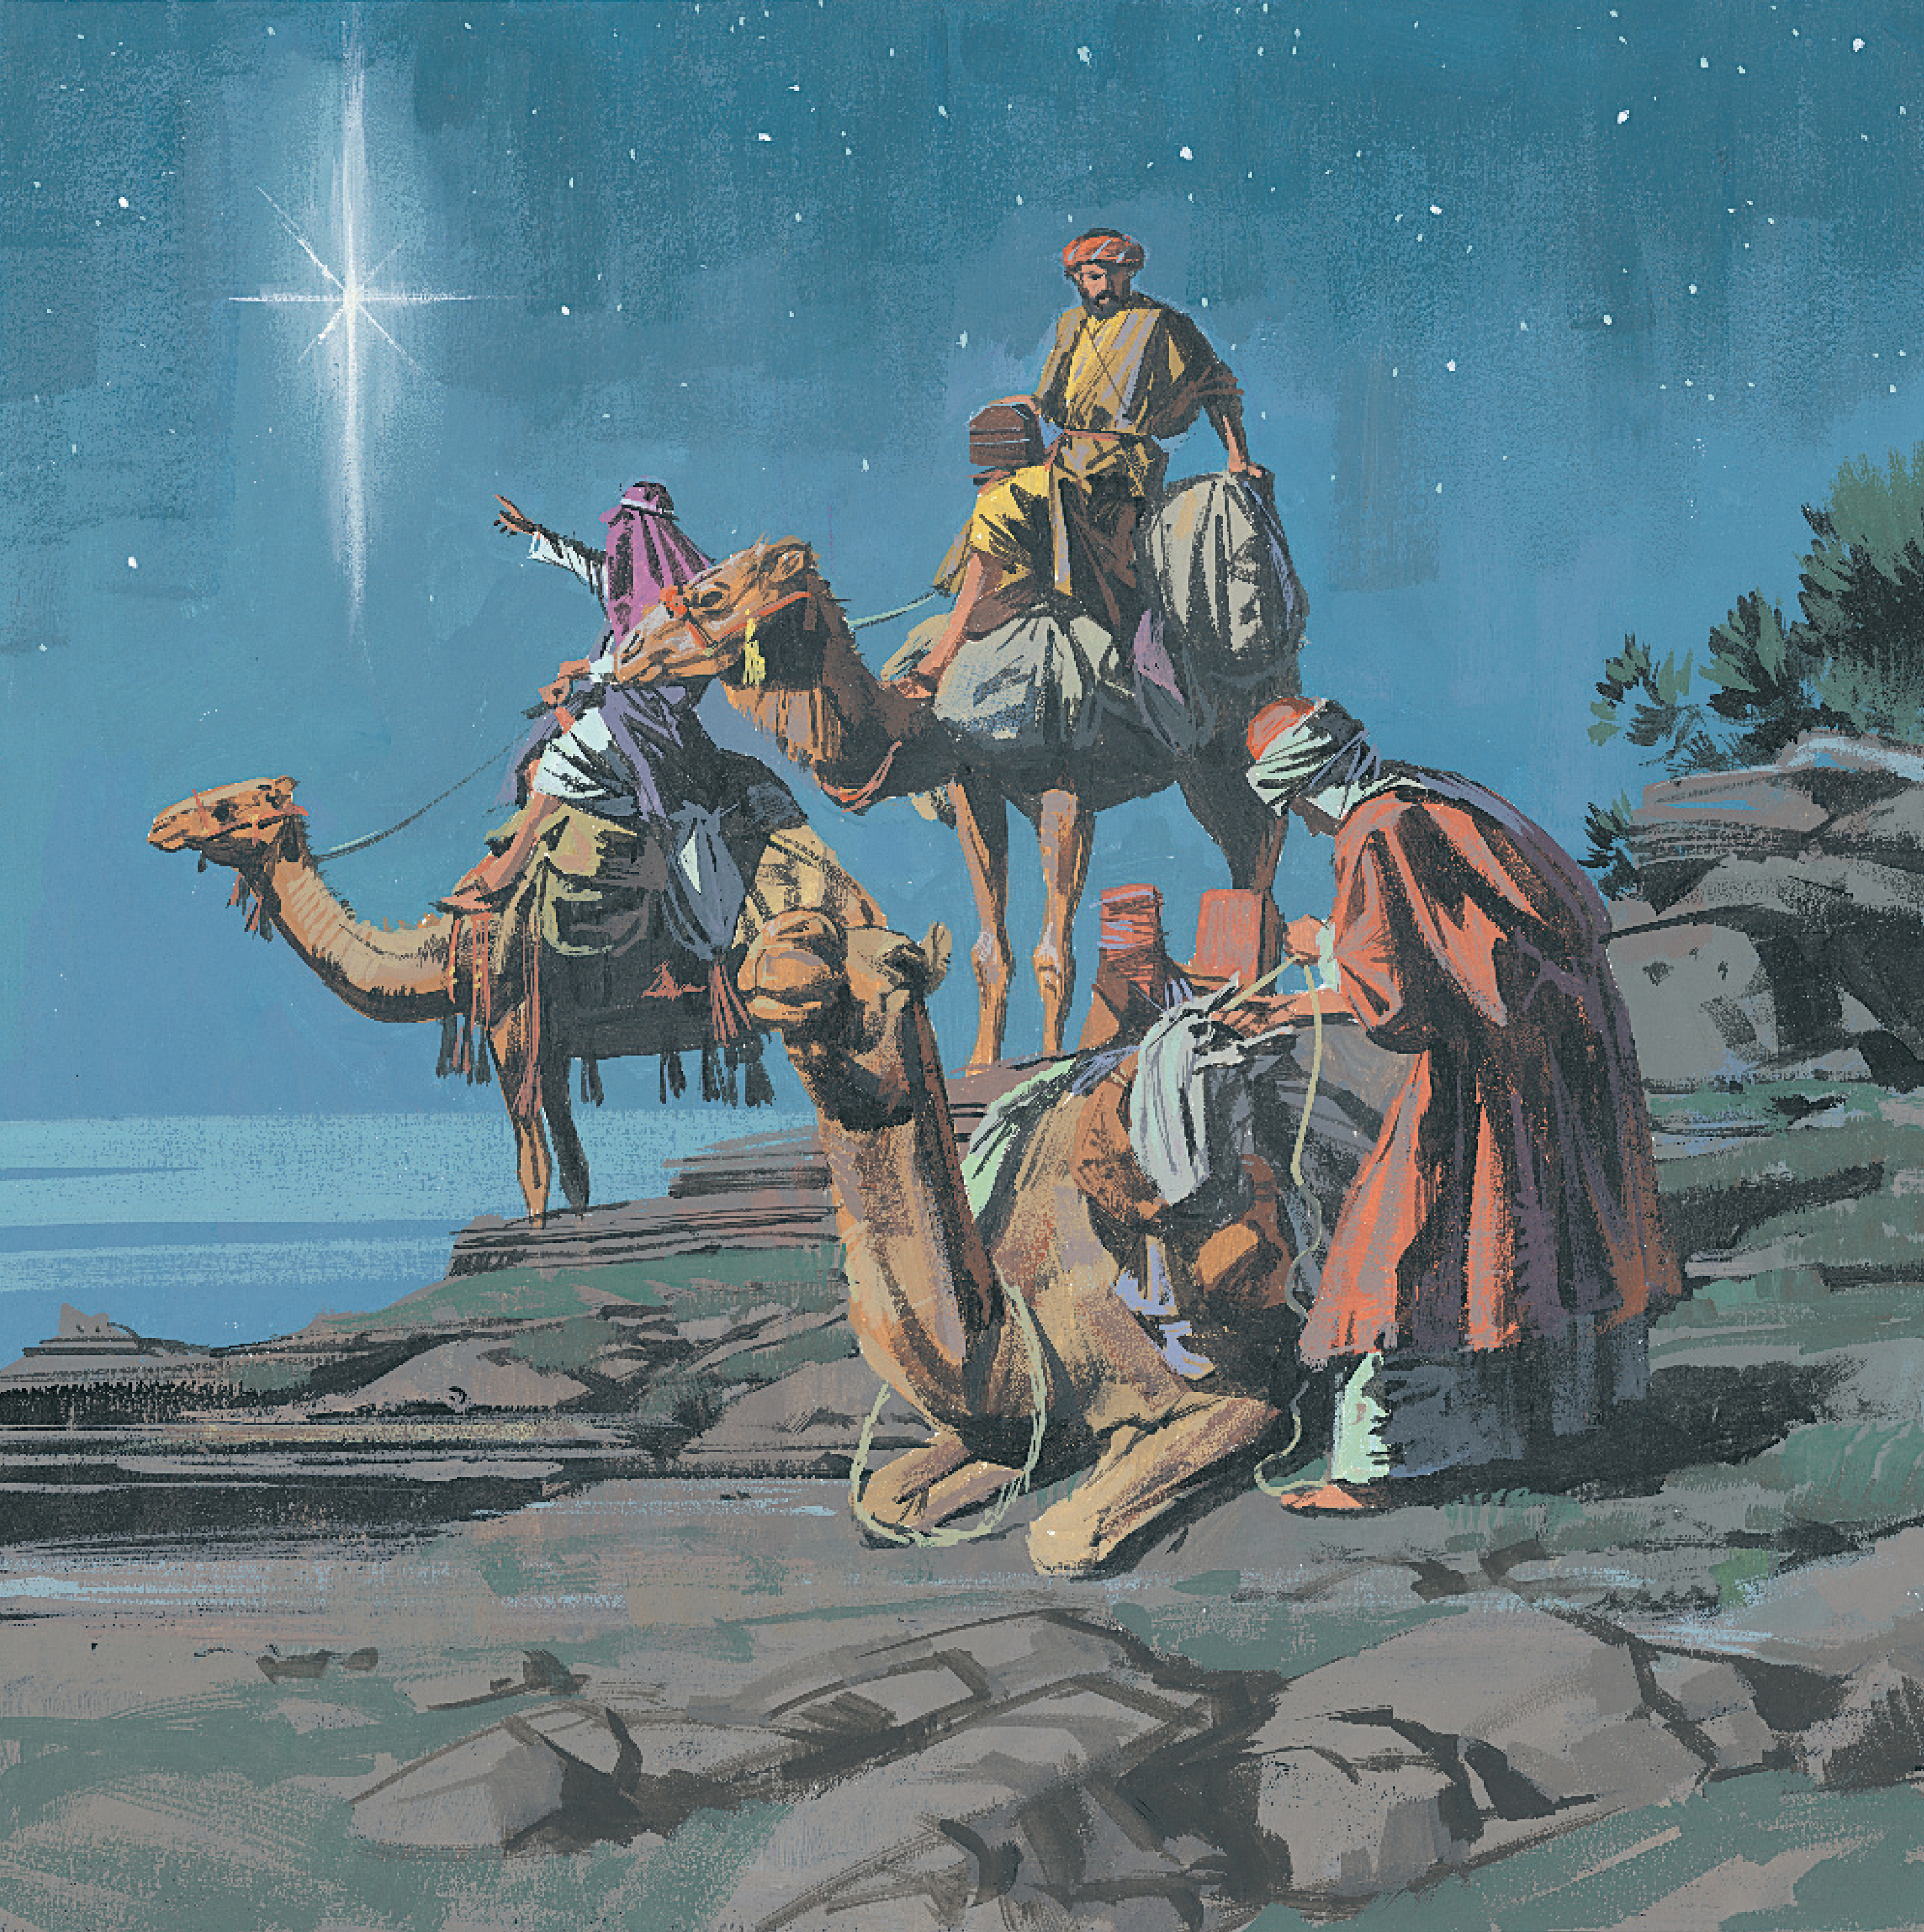 The three Wise Men follow the star to find the baby Jesus.